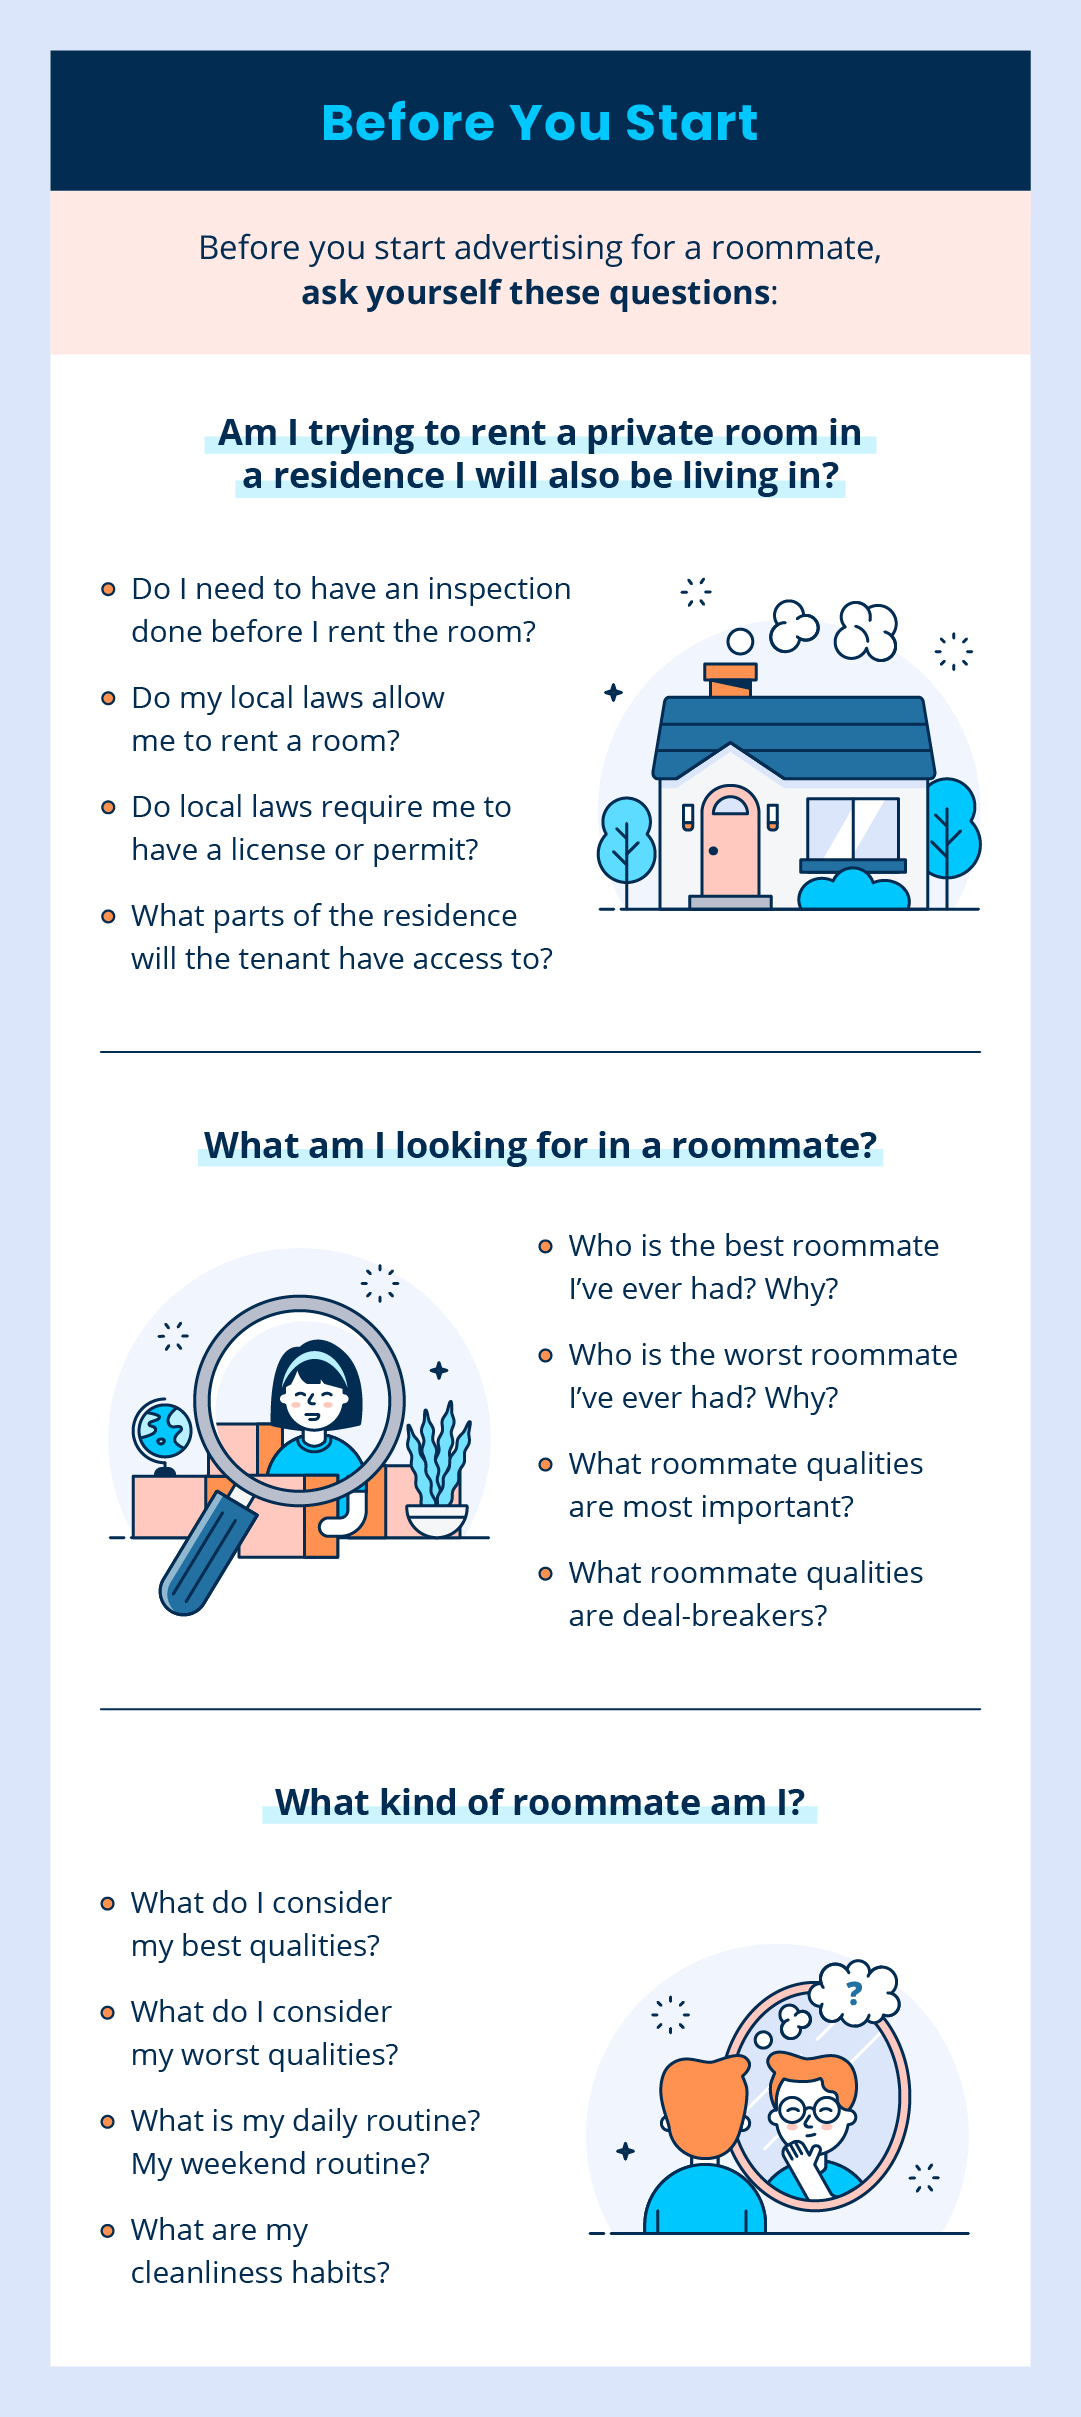 Before you start your search for the perfect roommate, know exactly the kind of person you're looking for.